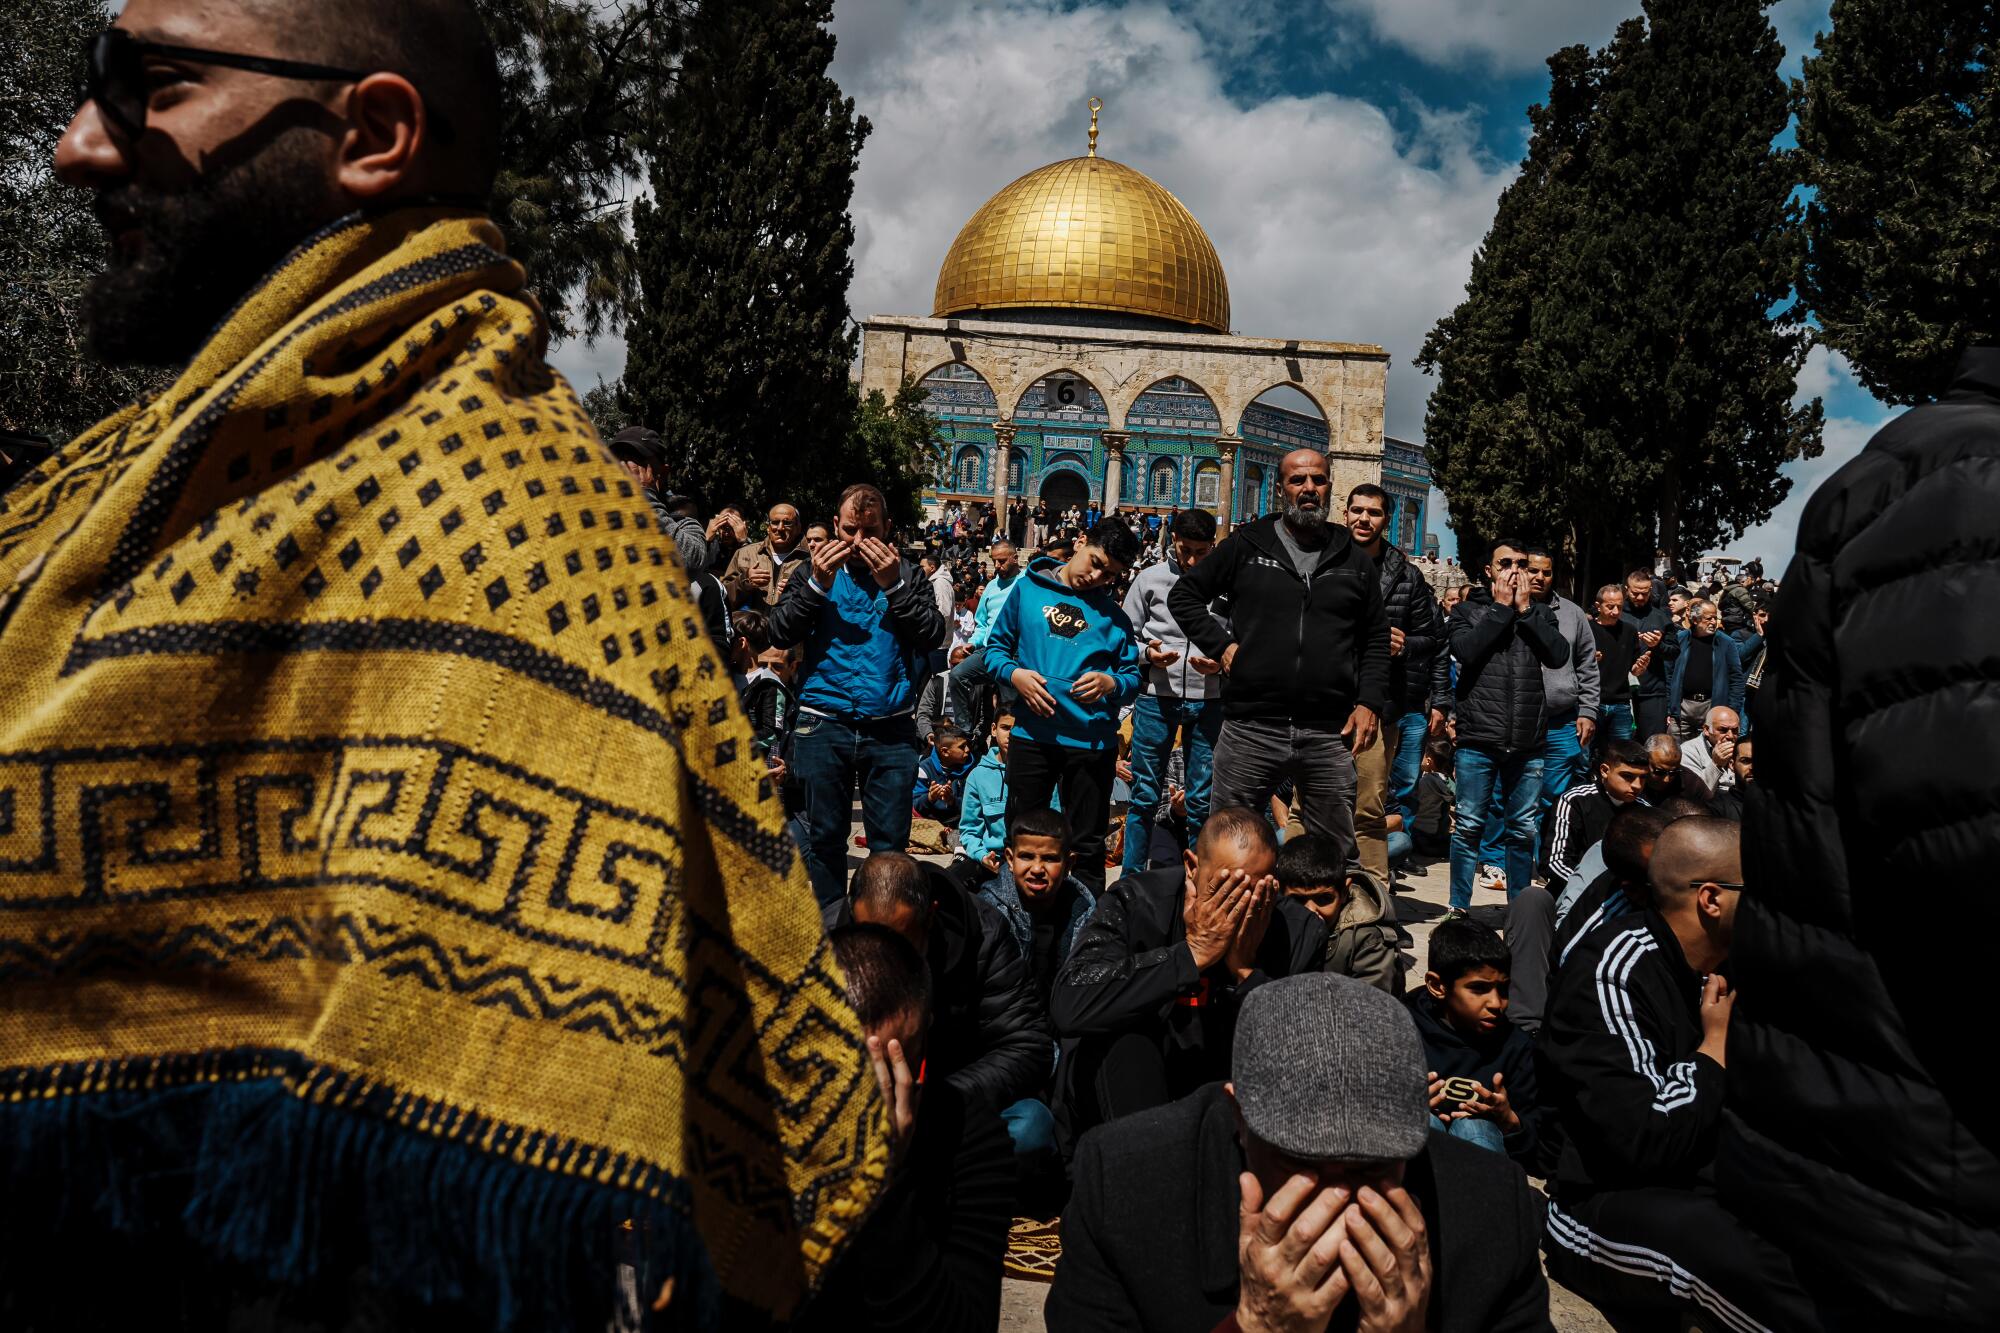 Worshipers listen to a sermon during noon prayers in the Al Aqsa Mosque.